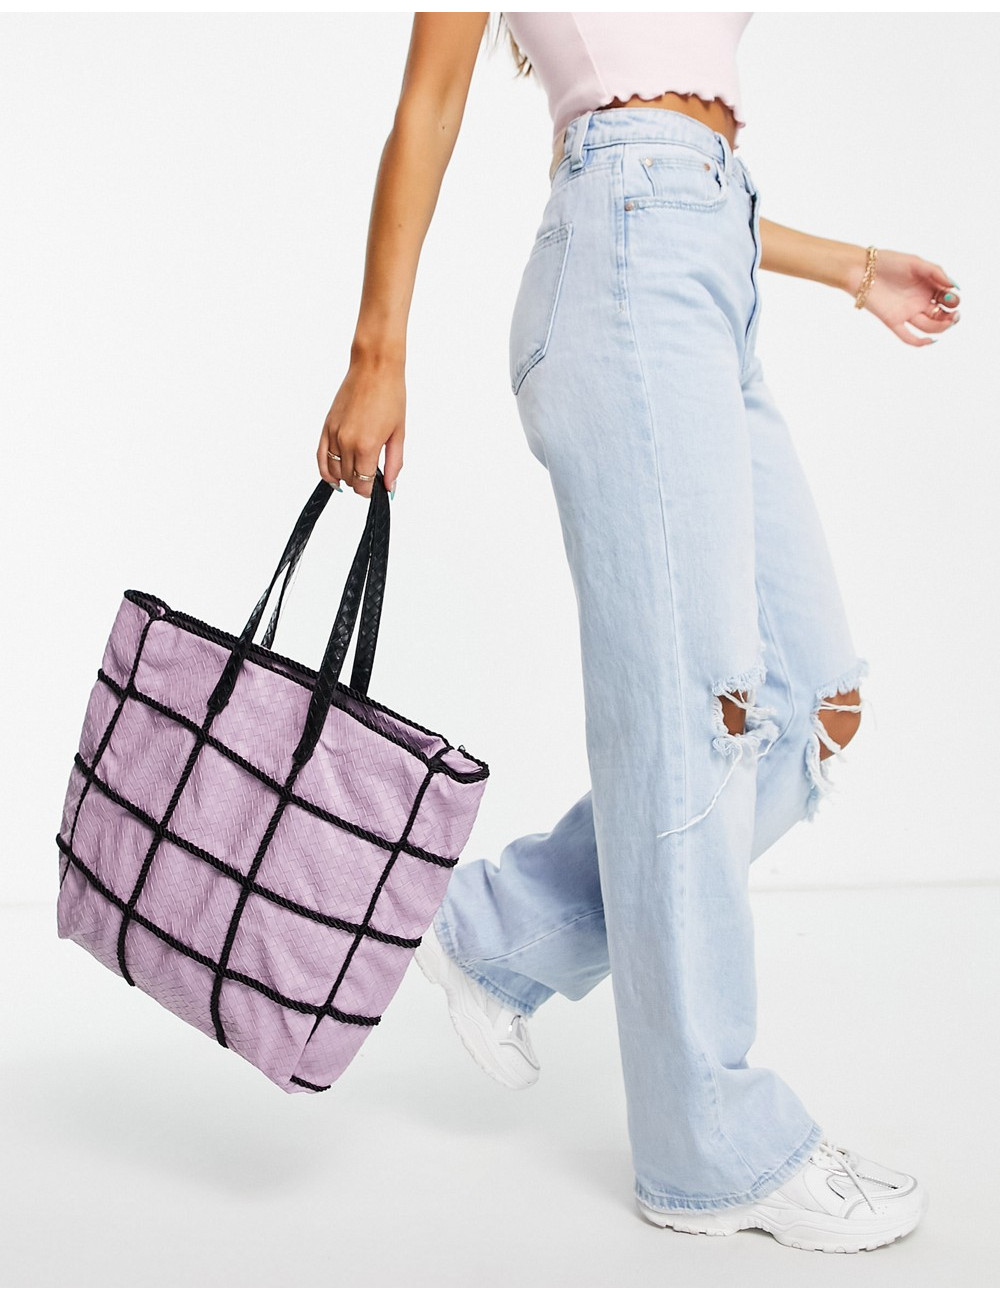 SVNX straw tote bag with...